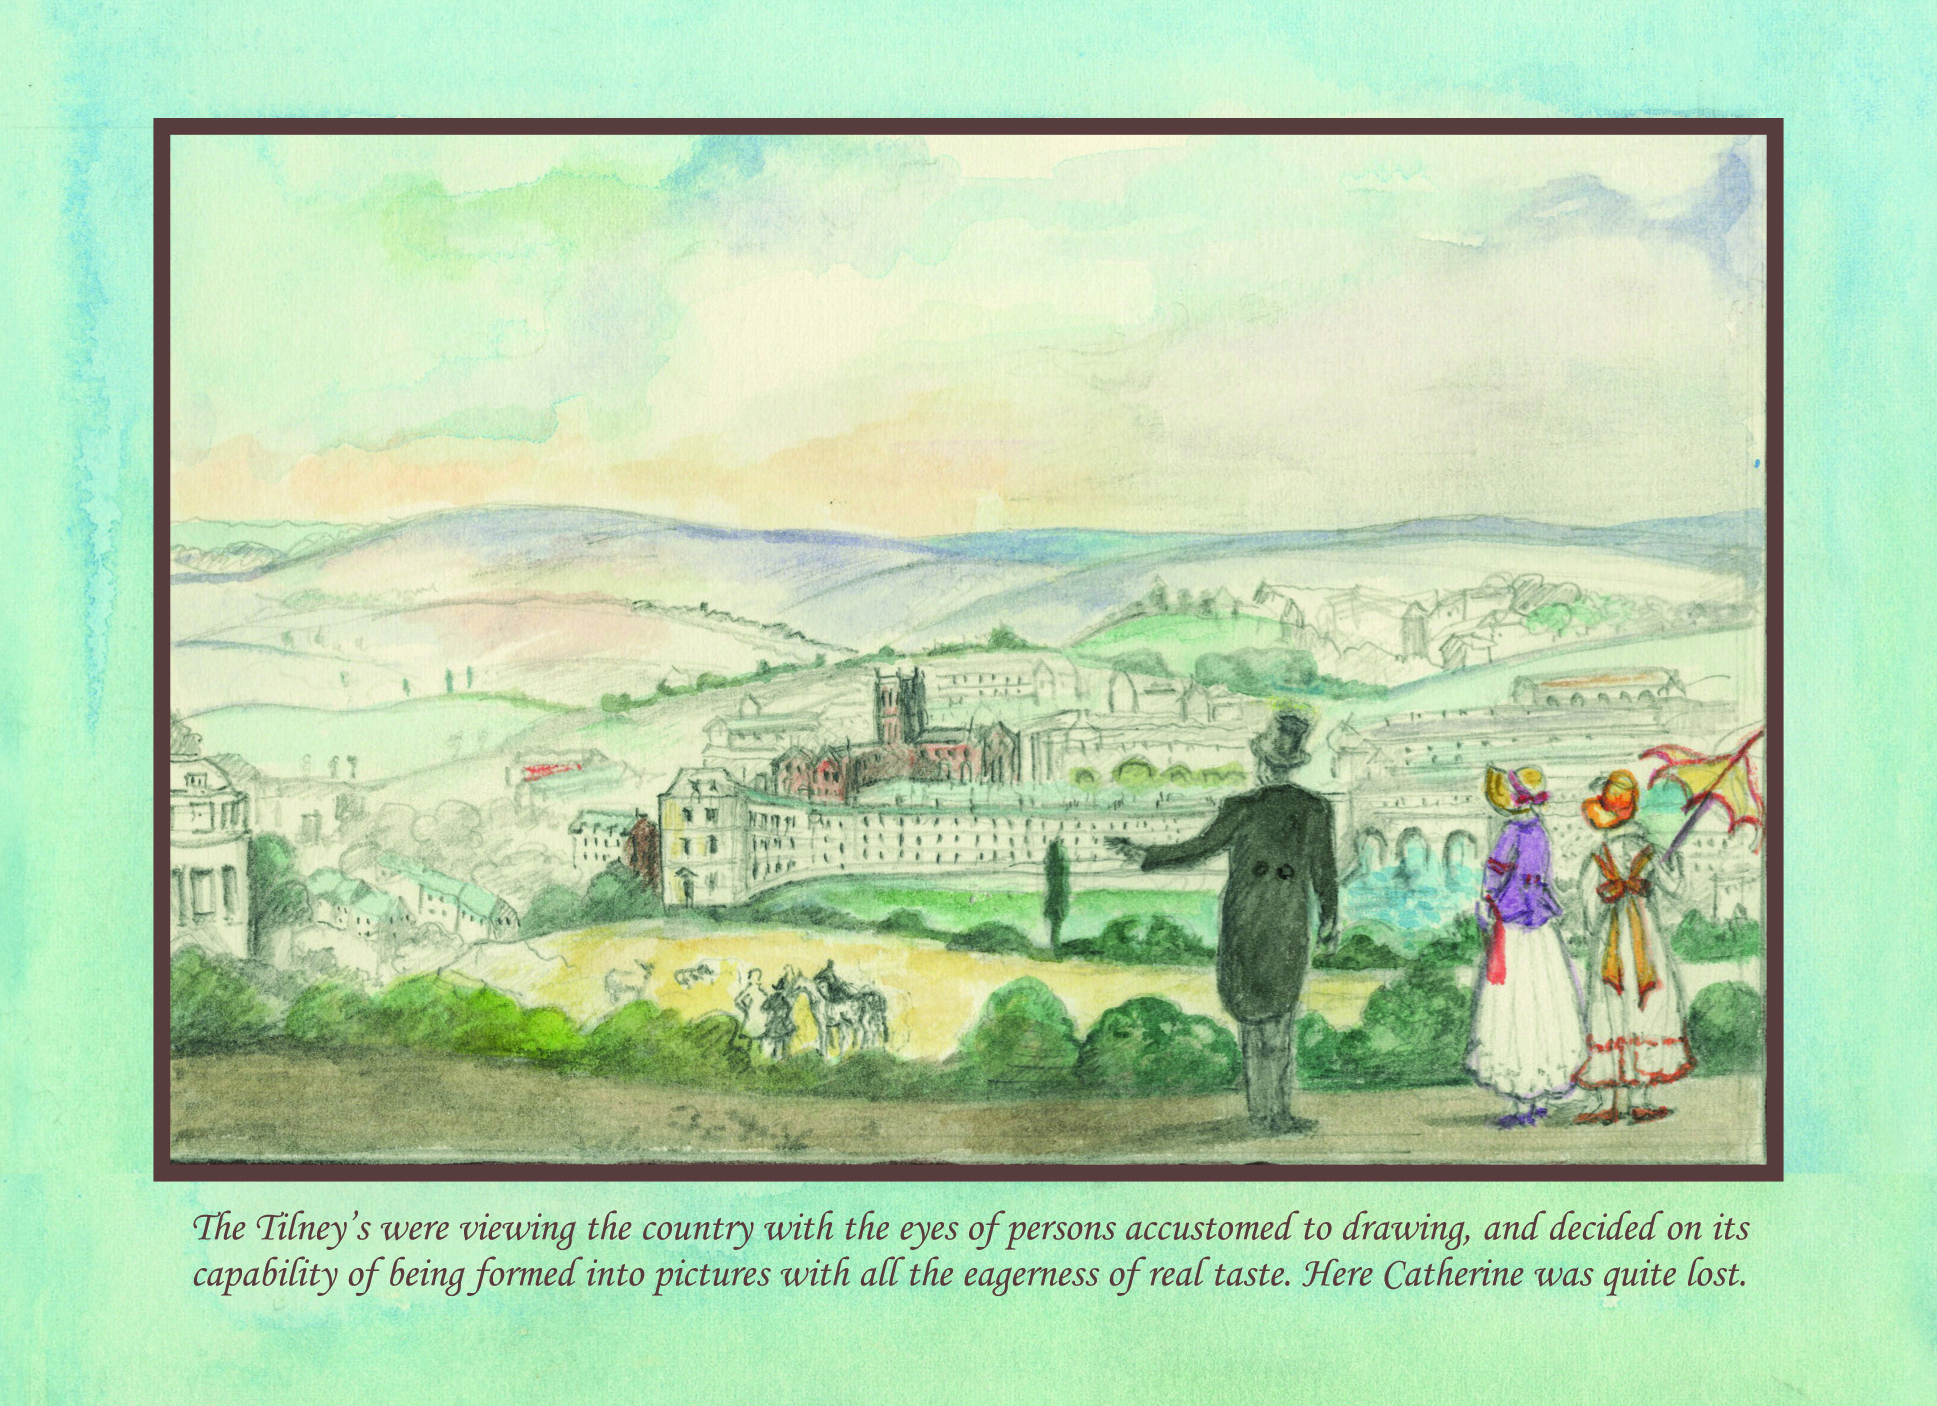 The Tilneys were viewing the country with the eyes of persons accustomed to drawing  - Jane Austen card on sale at Winchester Cathedral gift shop.